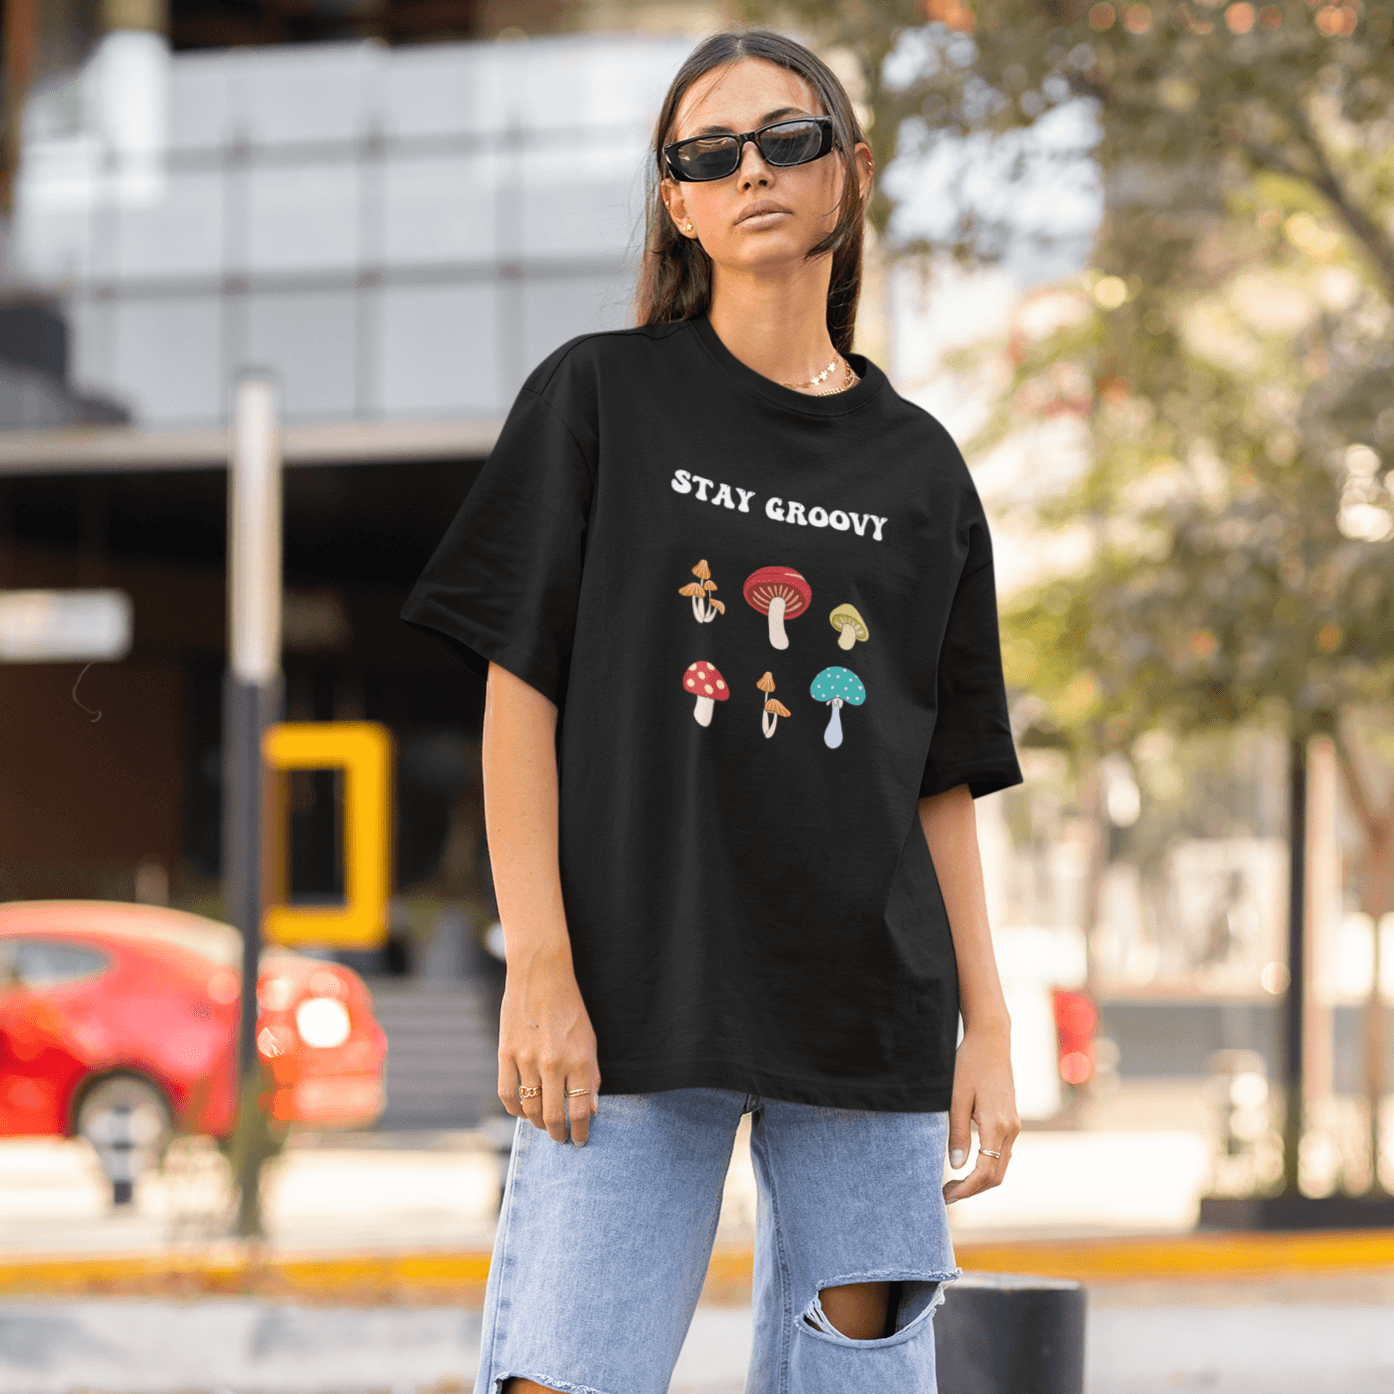 Stay Groovy Over-sized Unisex T-shirts - Cute Stuff India